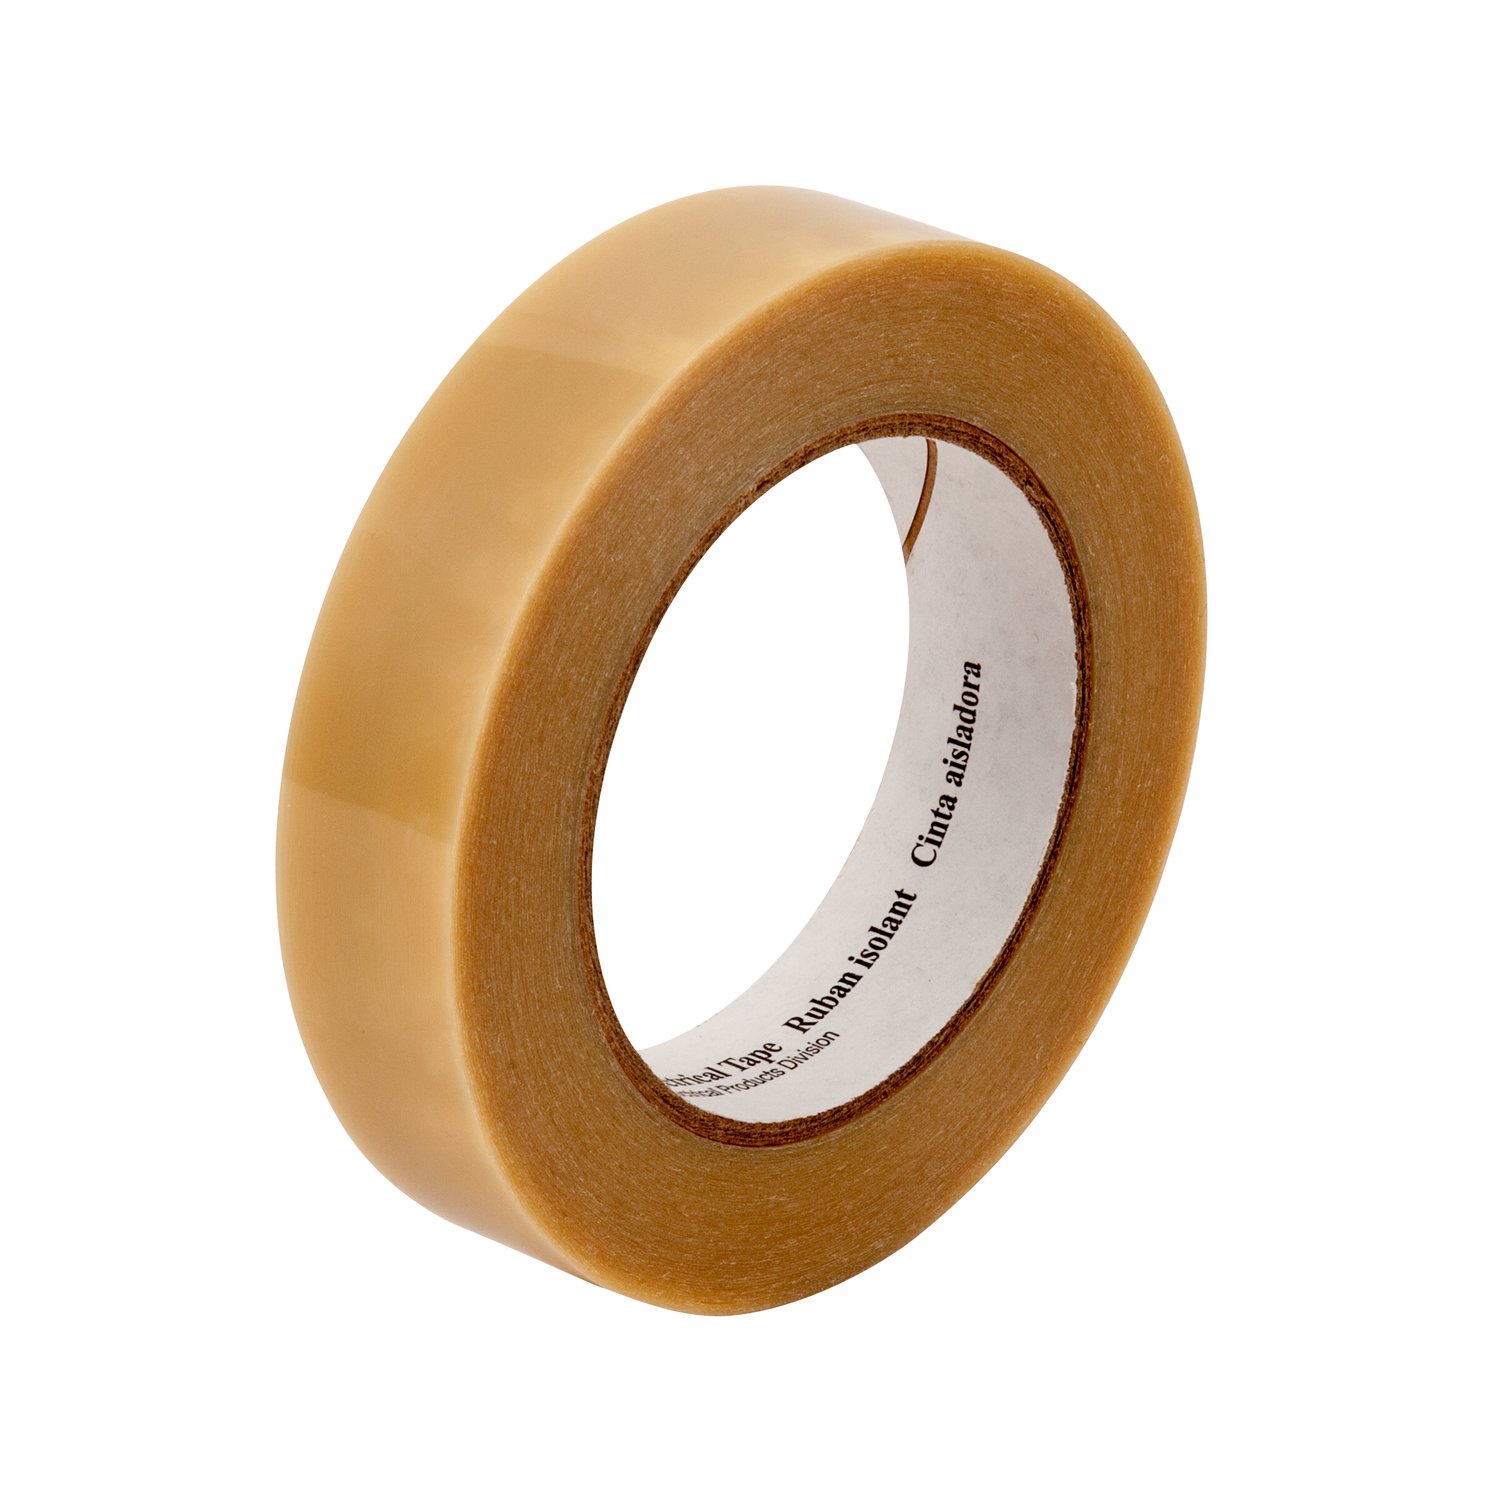 7010045345 - 3M Polyester Film Electrical Tape 58, 1 1/2 in X 72 yds, 3in paper
core, Bulk, 24 Rolls/Case